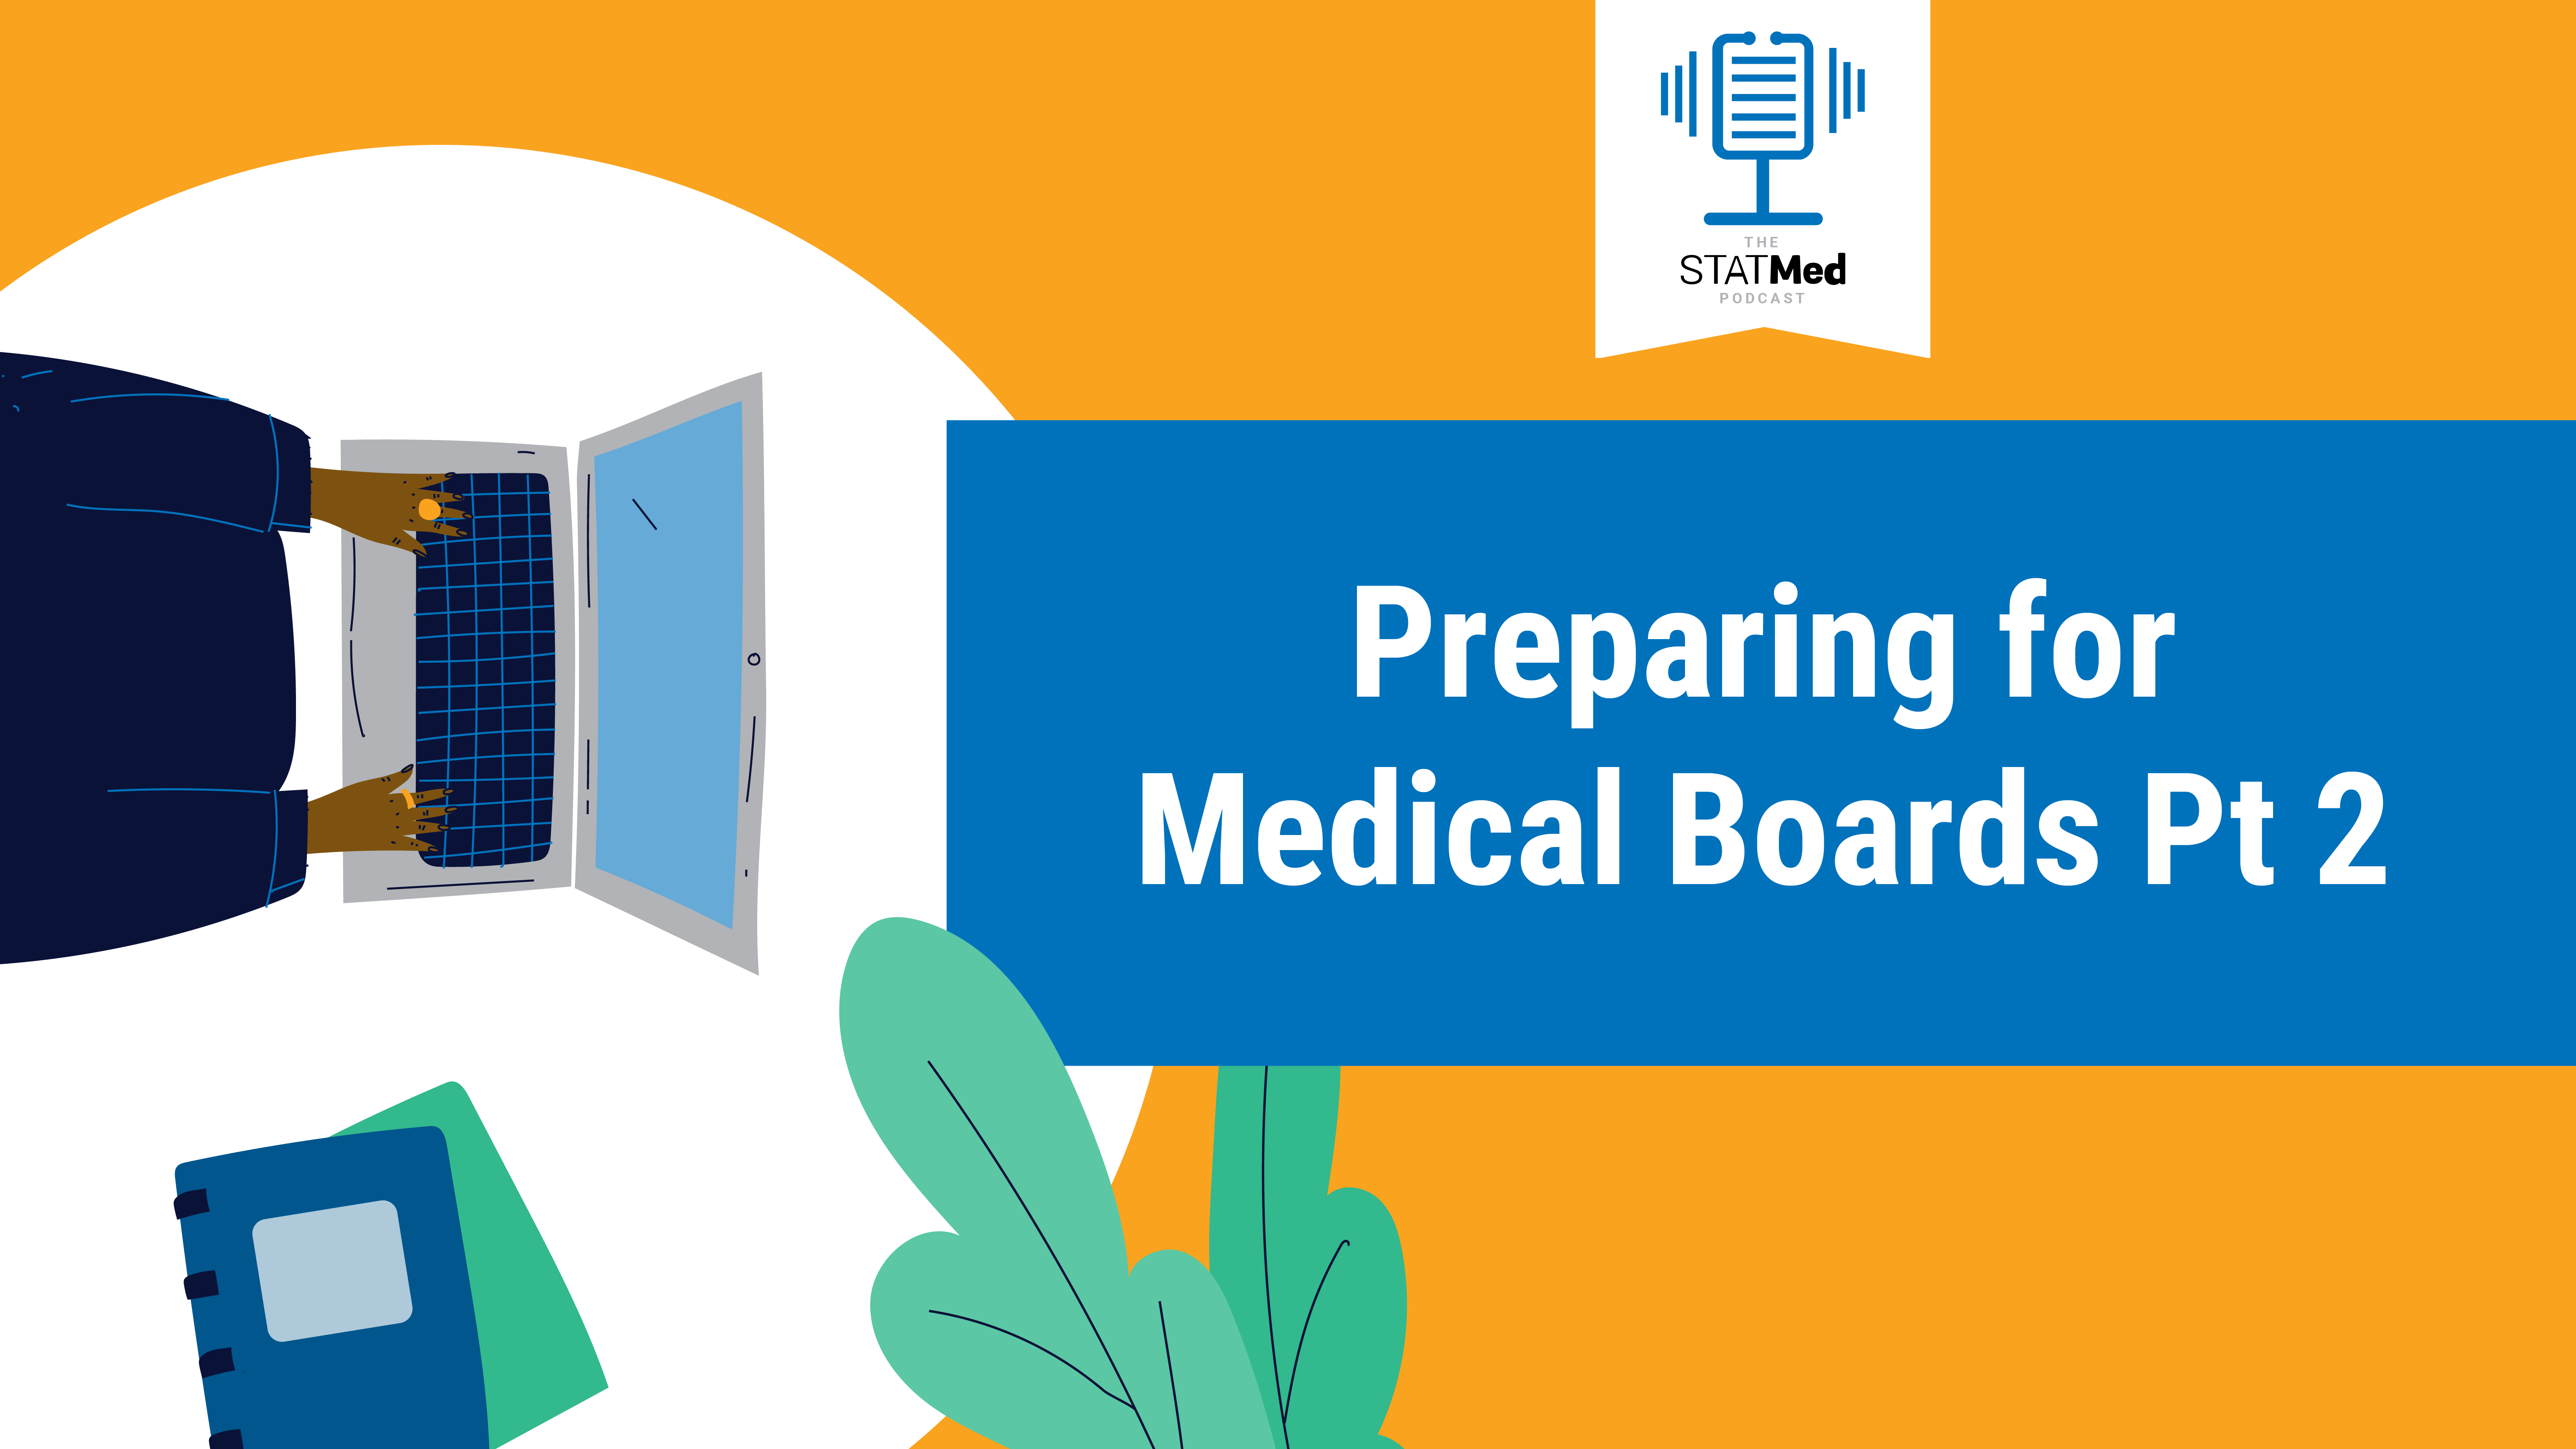 Featured image for “On the STATMed Podcast: Preparing for Medical Boards Pt 2”